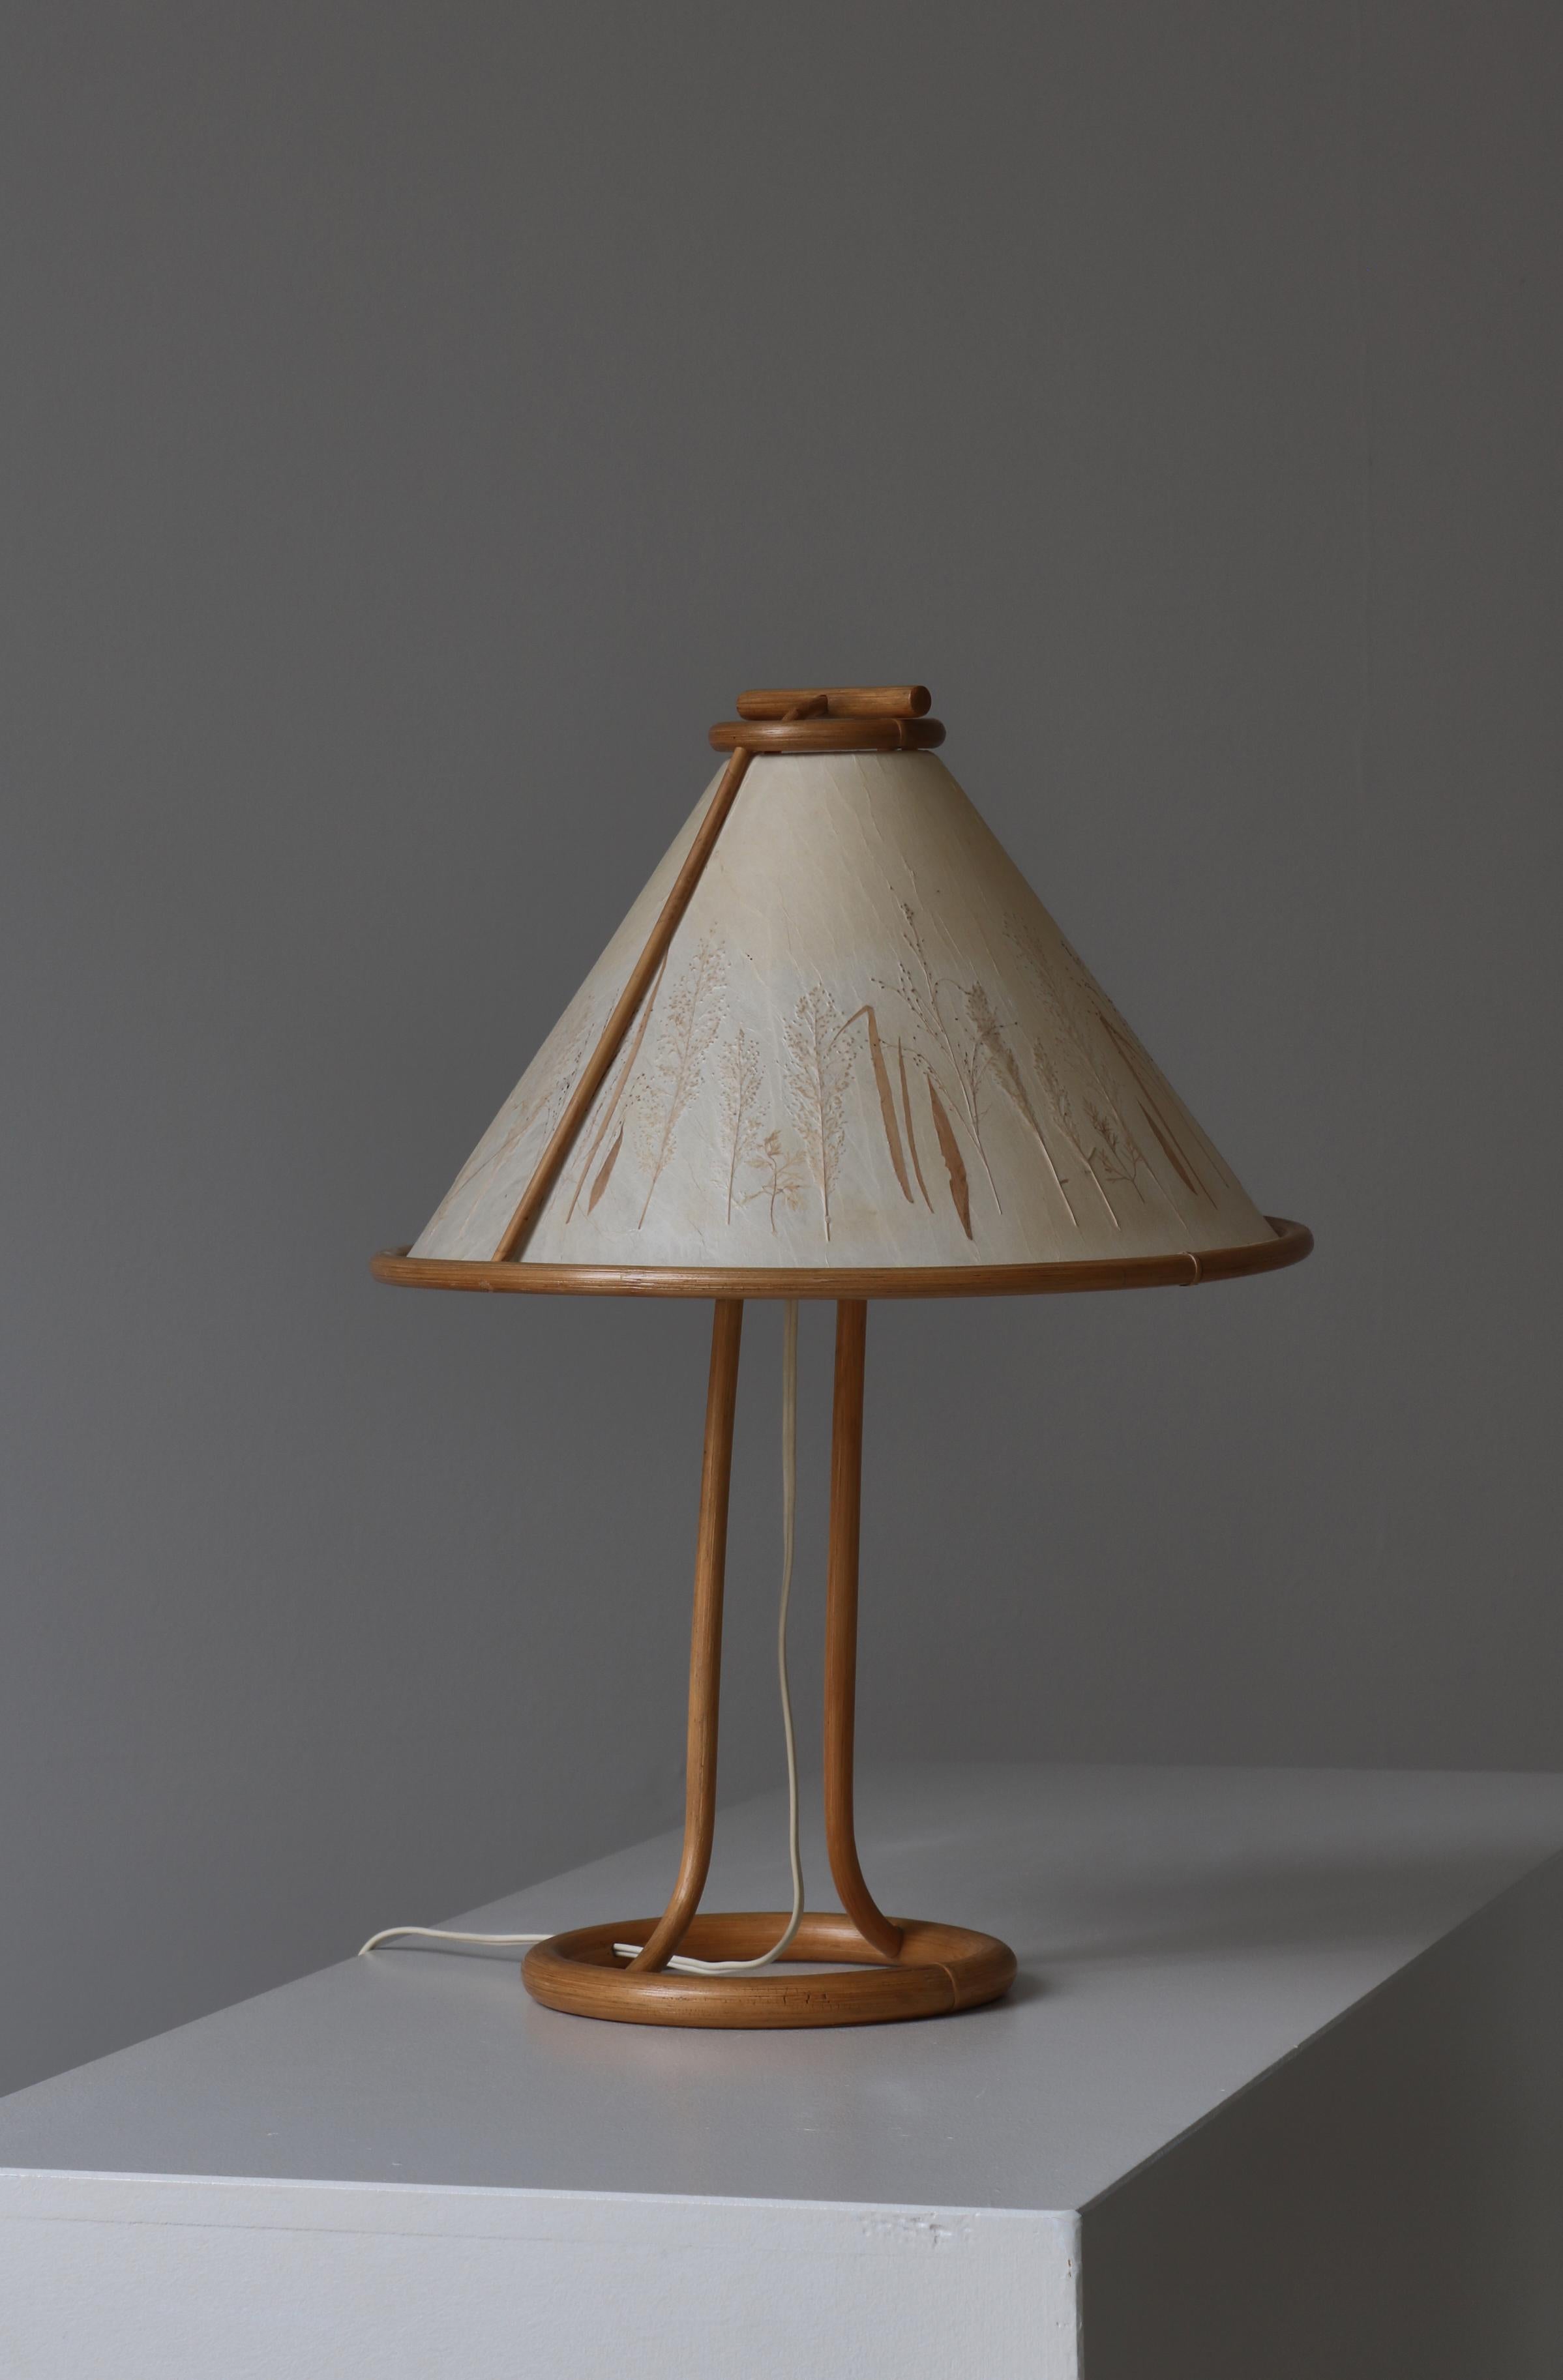 Scandinavian Wabi-Sabi Bamboo Table Lamp Shade with Pressed Plants, 1950s For Sale 2